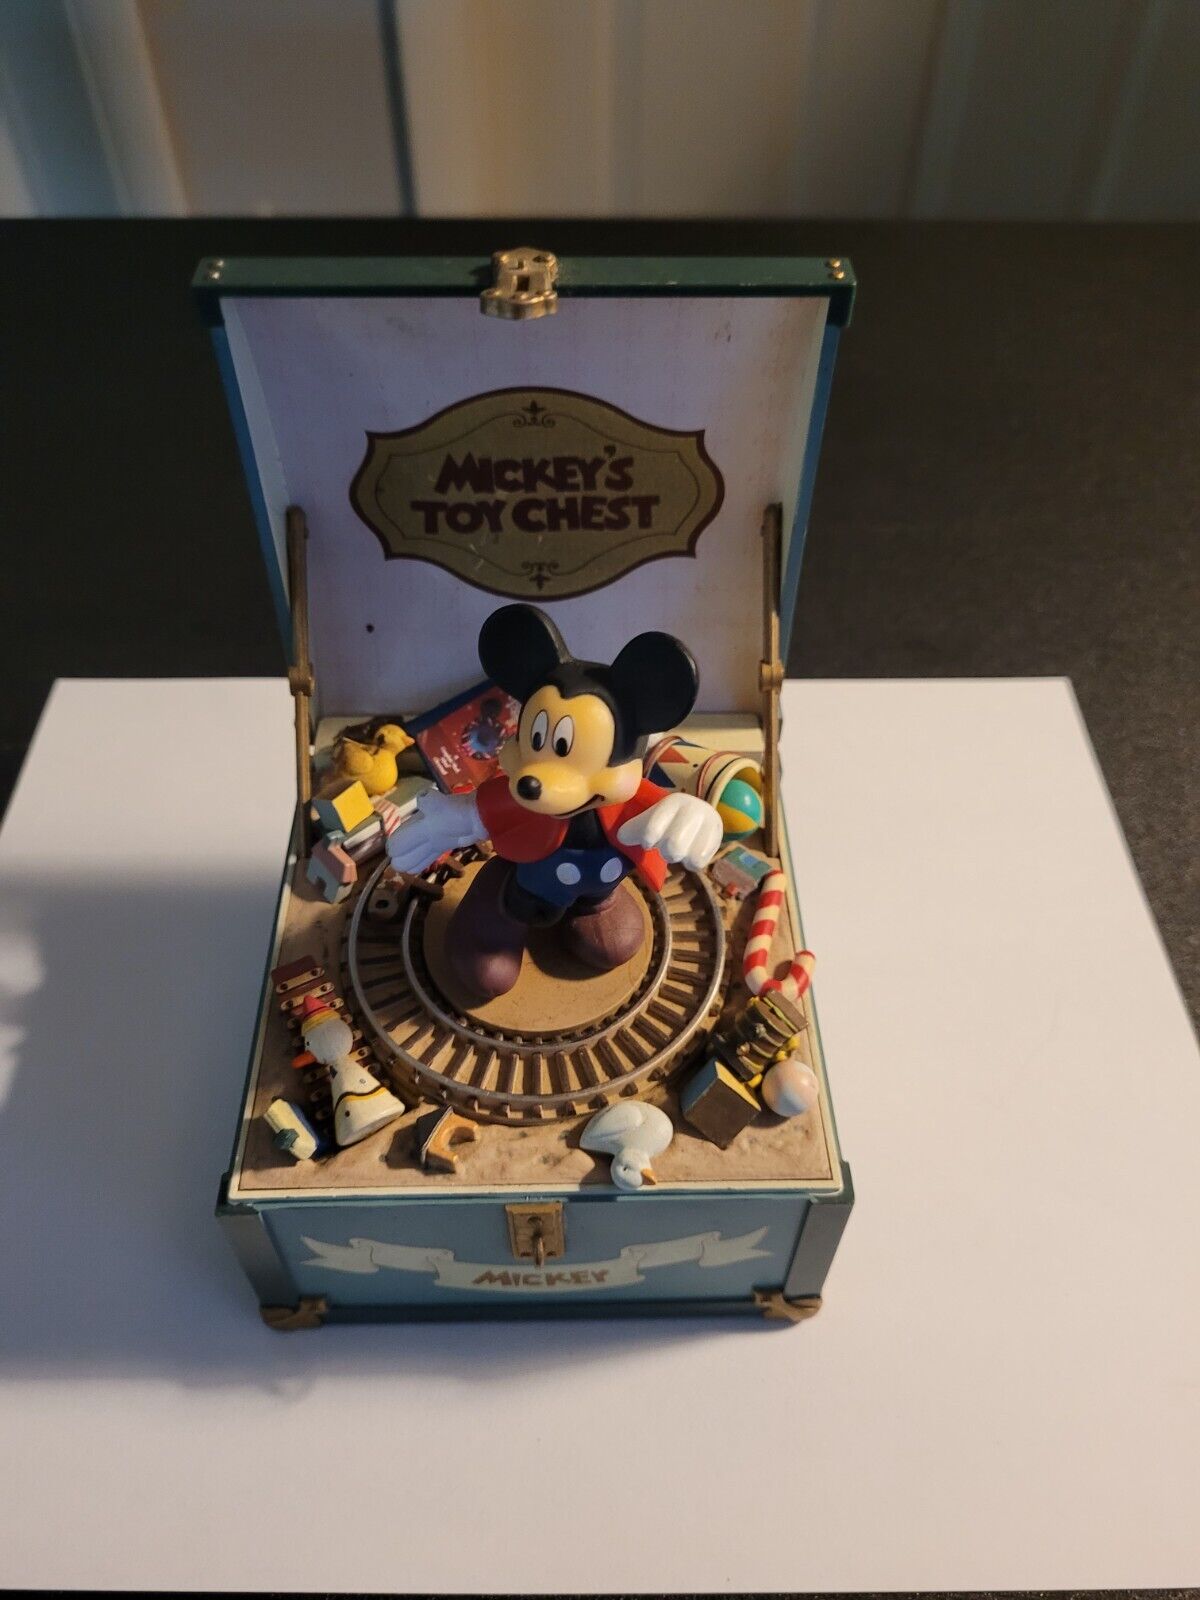 VINTAGE Rare Schmid Mickey\'s Toy Chest Retired Music Box Wind Toyland